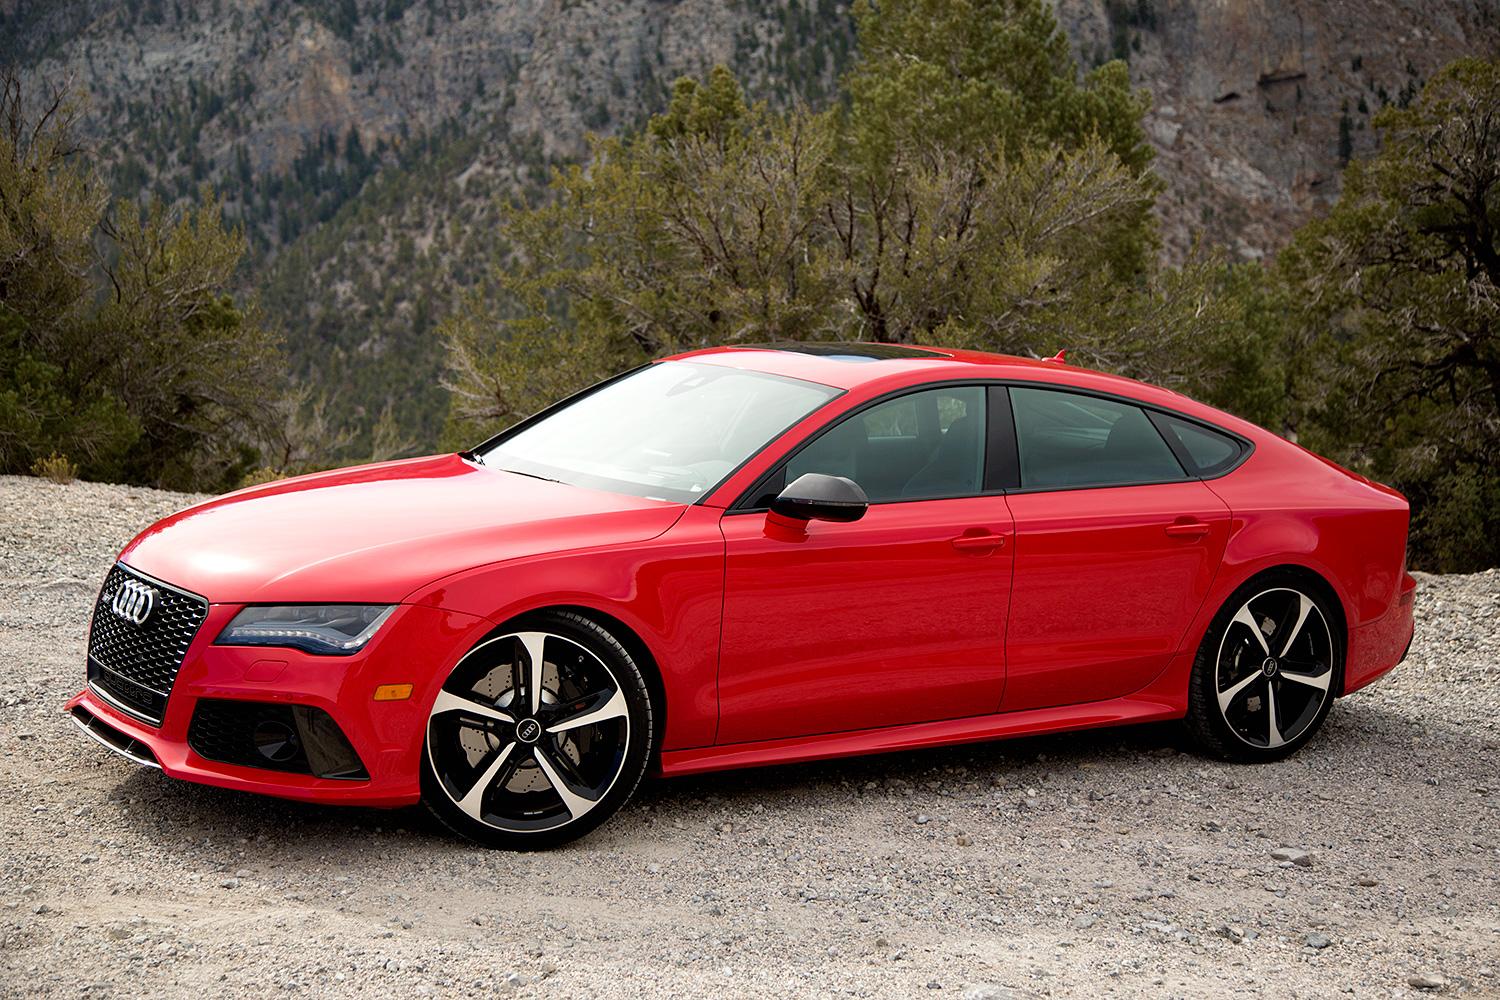 Audi RS7 With Color Shifting Red-To-Black Finish Looks Stunning